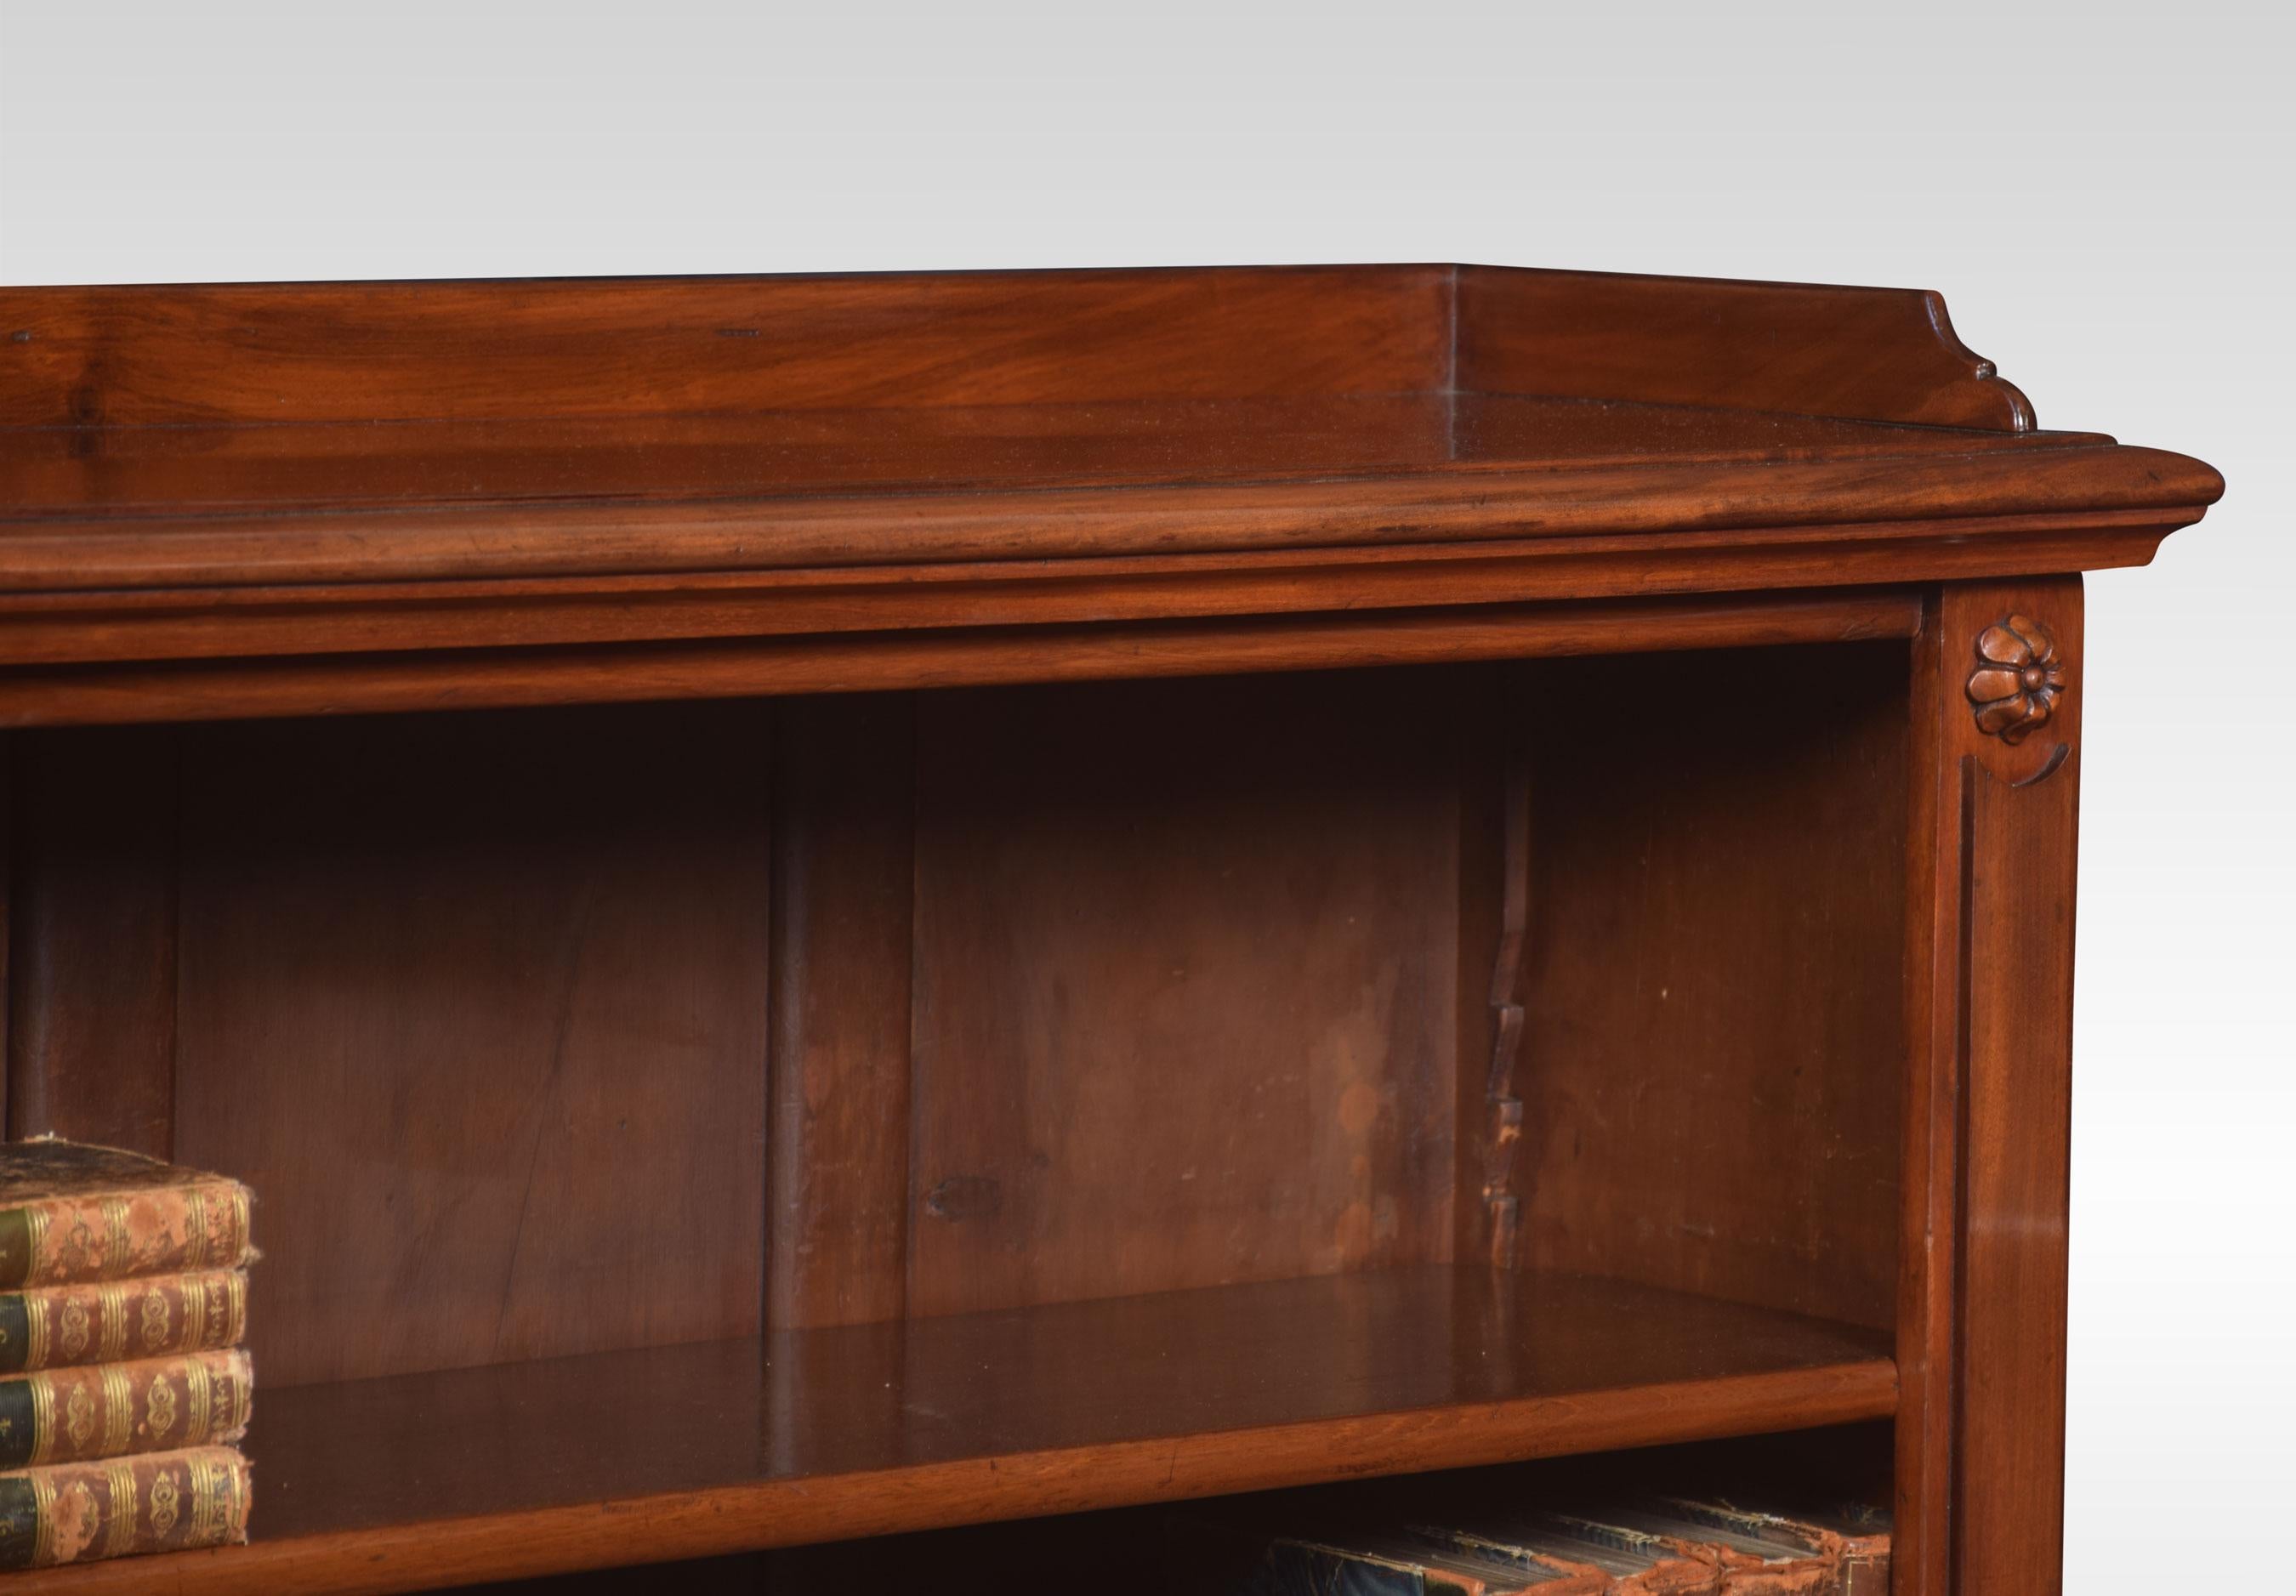 Pair of mahogany open bookcases, the raised three-quarter galleries above a large rectangular top with a moulded edge. The bookcases having two adjustable shelves enclosed by carved columns. all raised up on a plinth base
Dimensions
Height 43